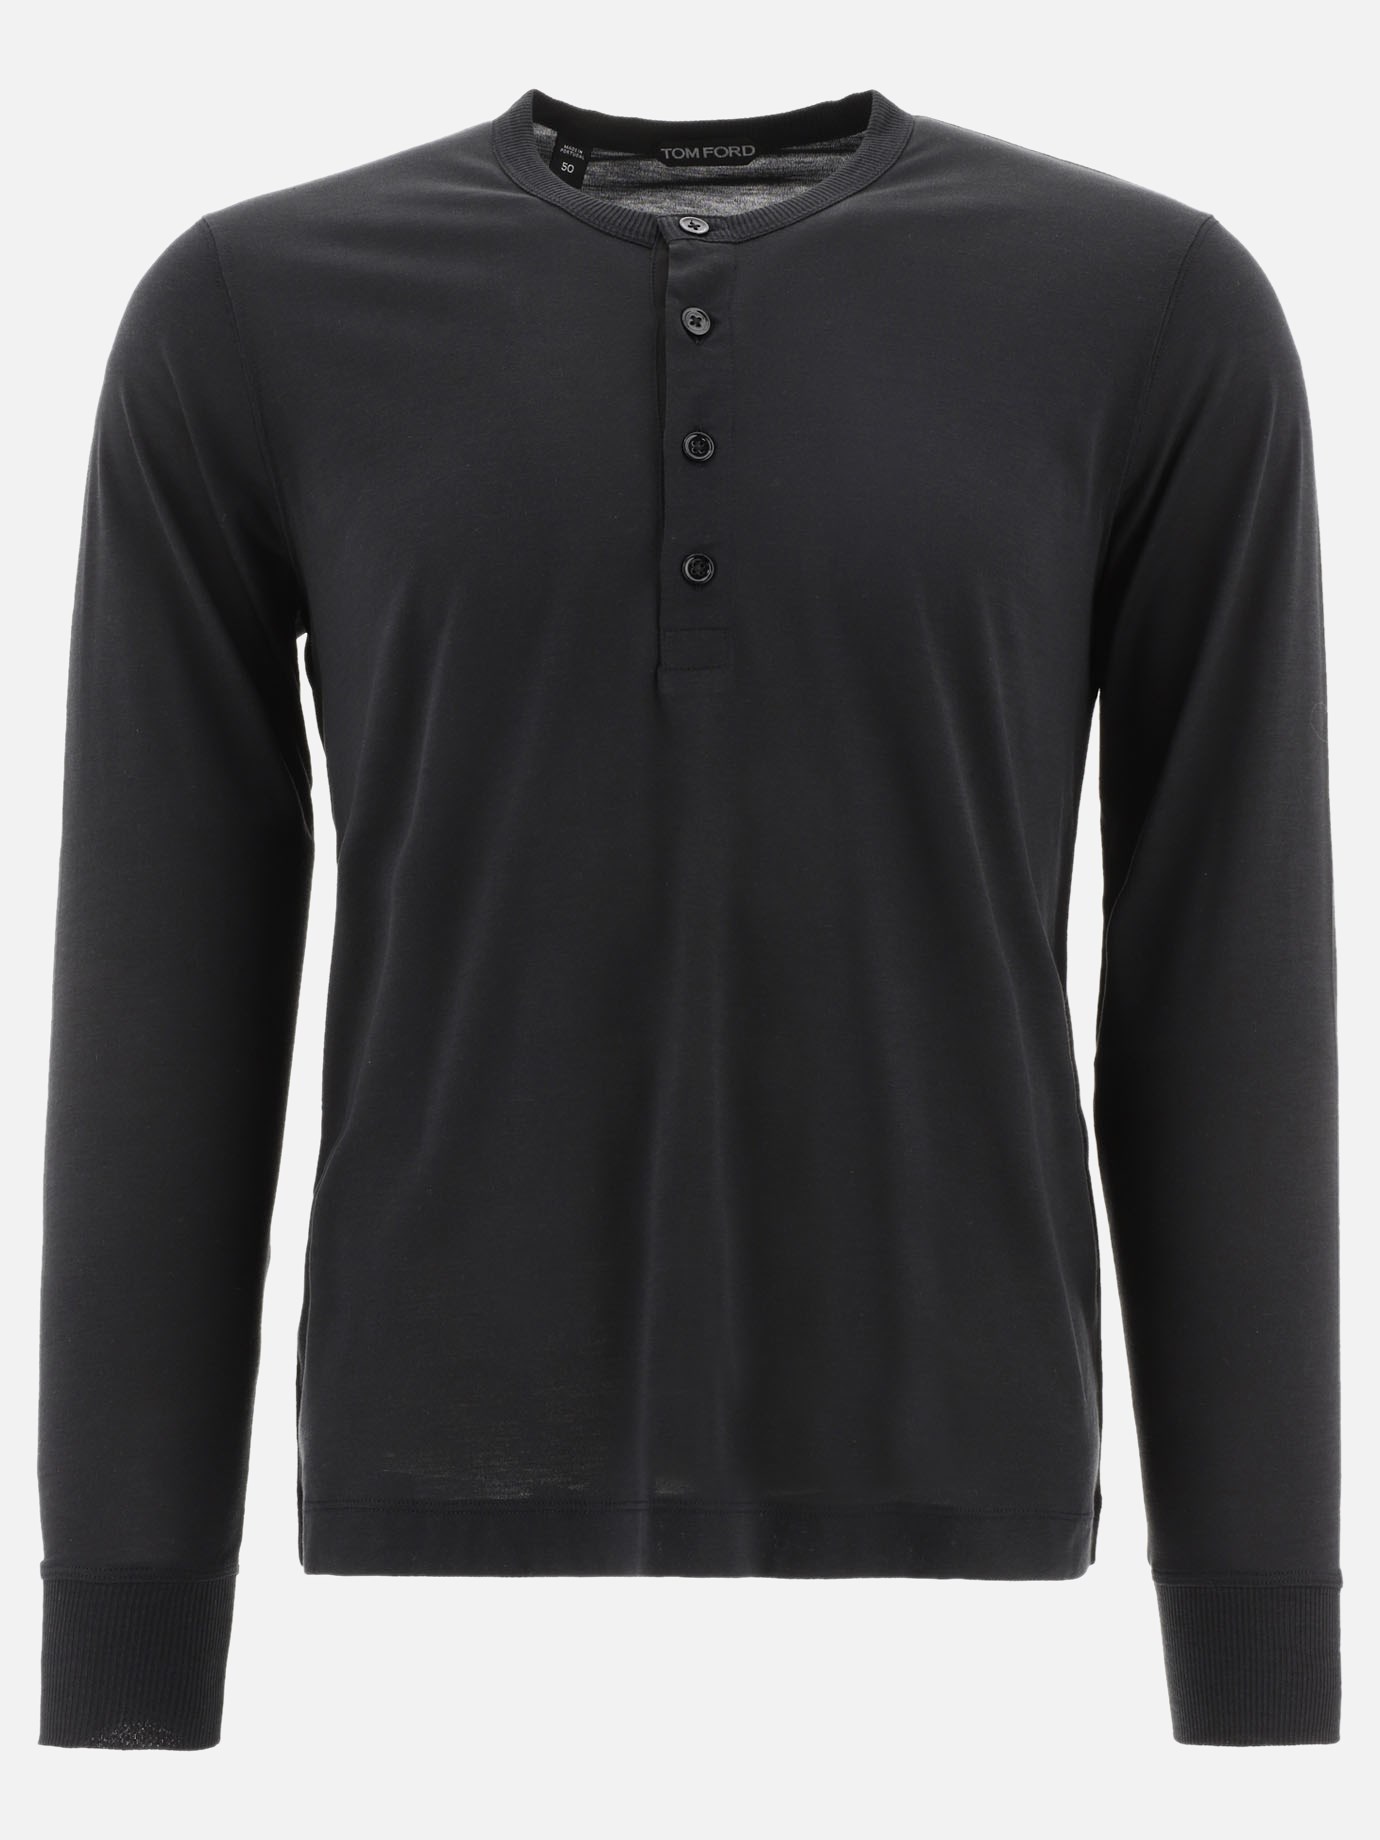  Henley  t-shirtby Tom Ford - 4